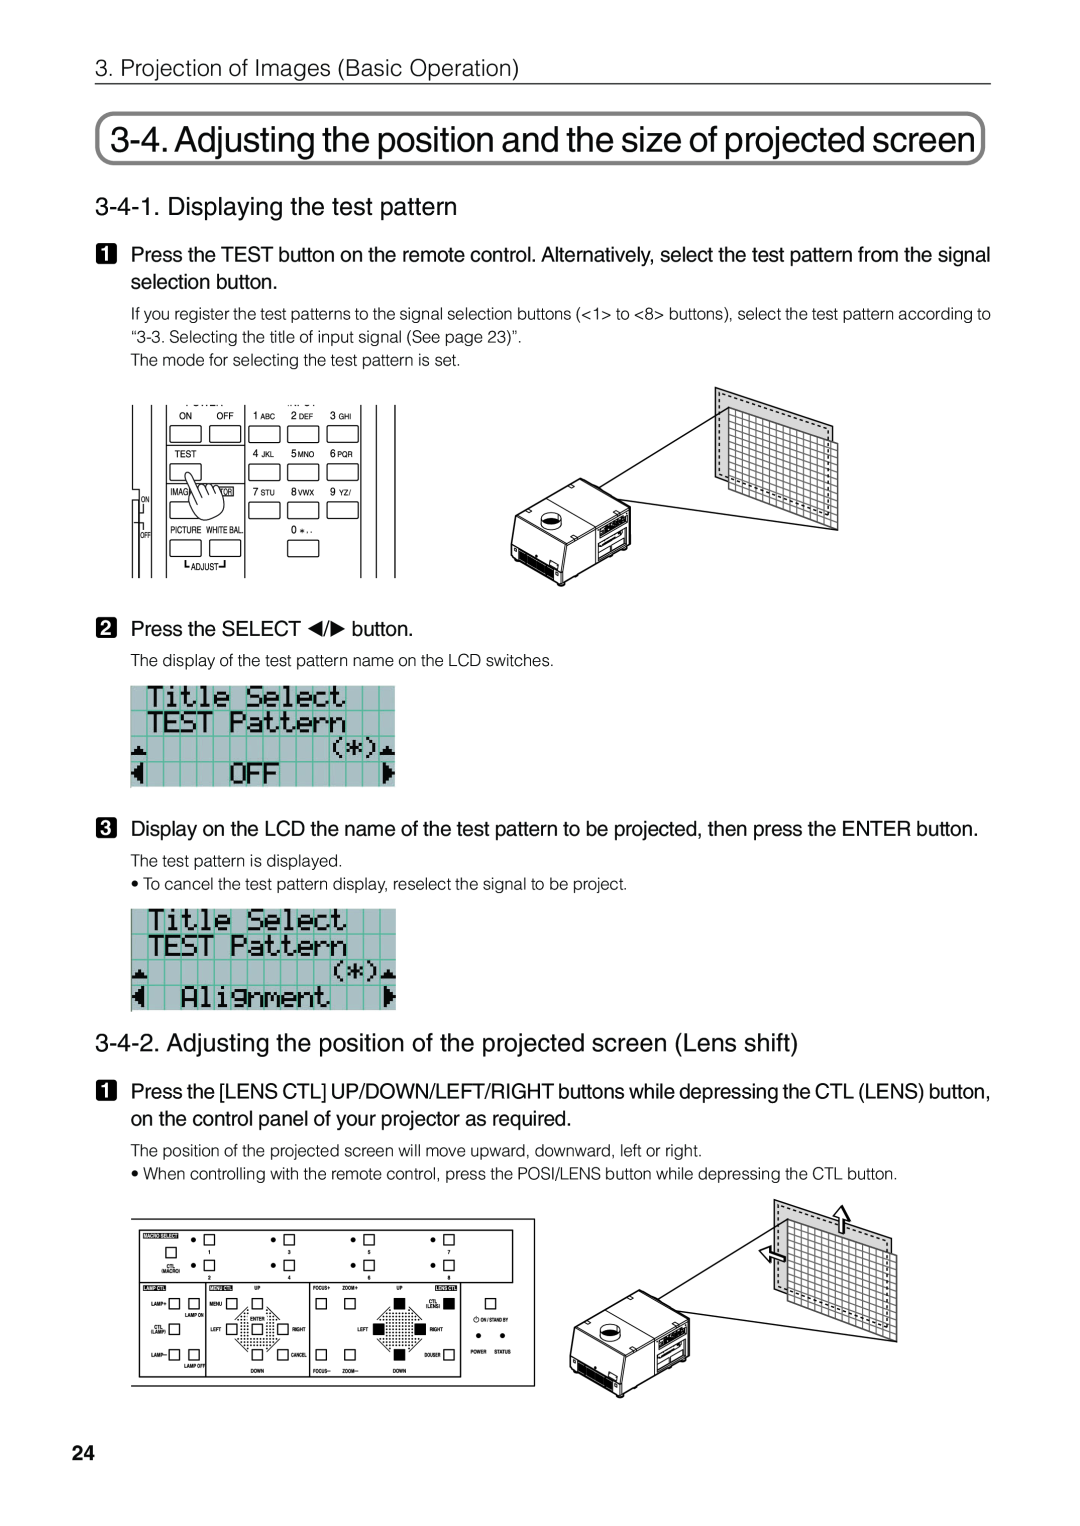 NEC NC1600C user manual Displaying the test pattern, Projection of Images Basic Operation 